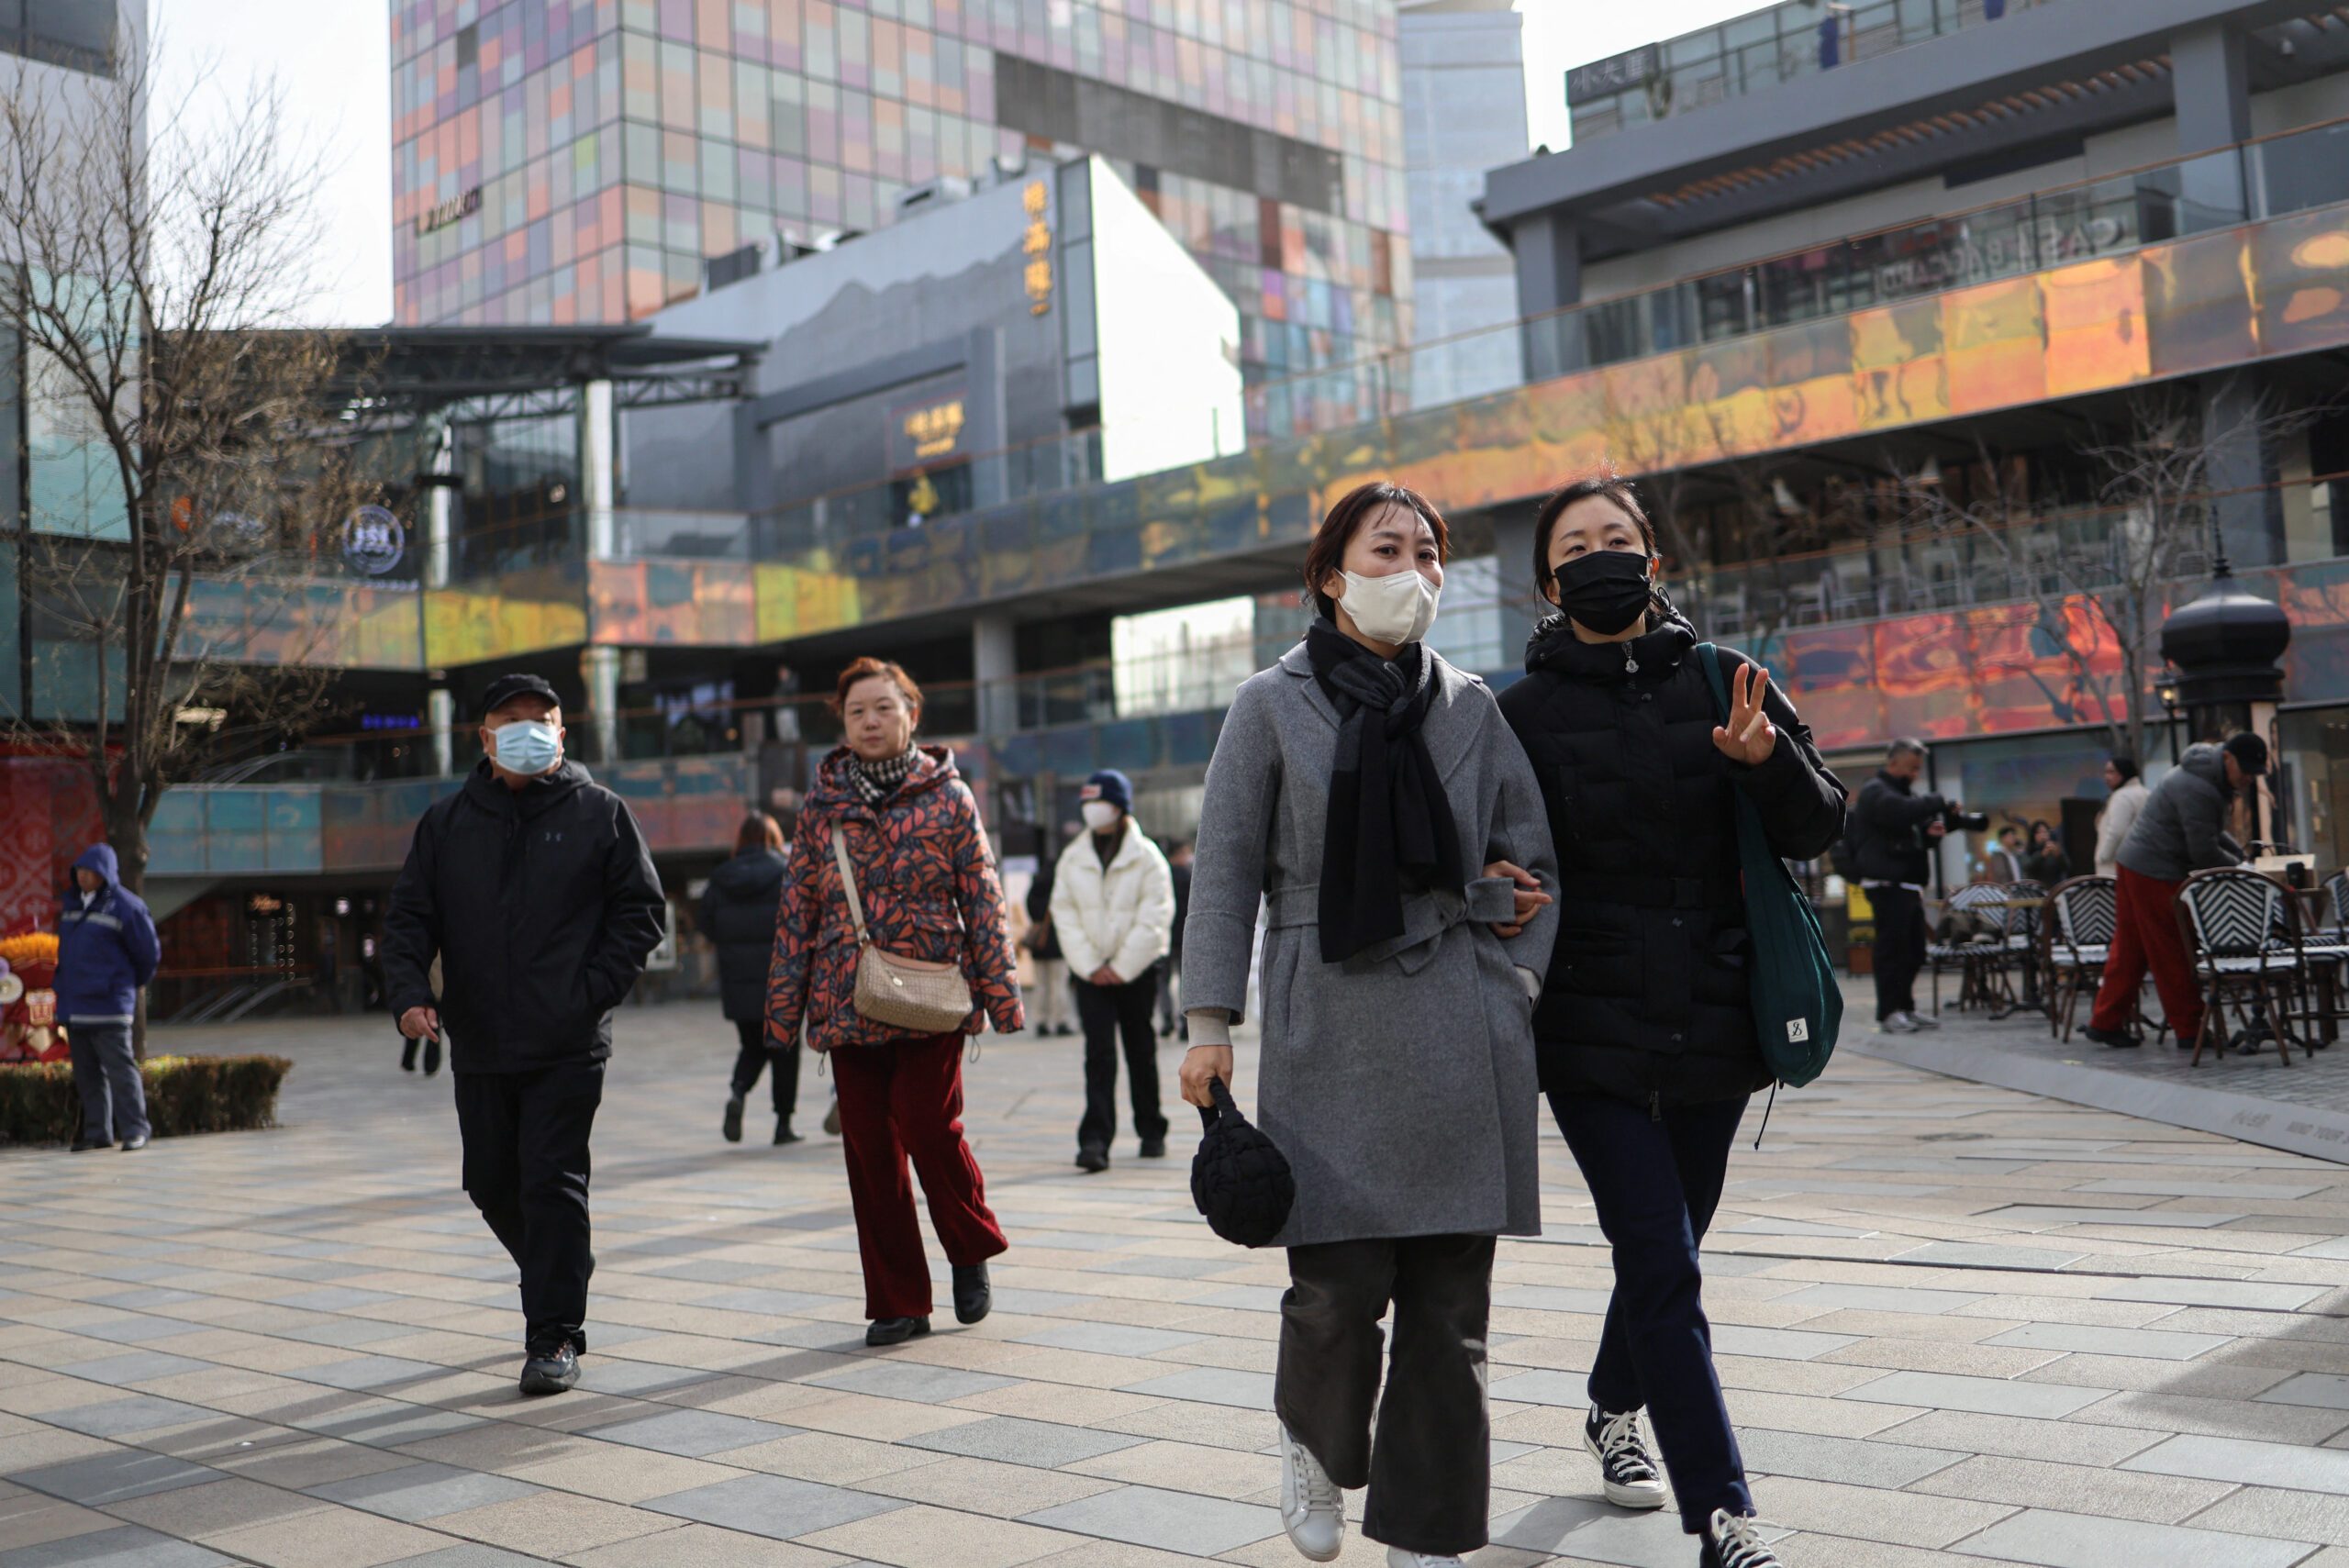 Fog, haze in China as New Year travelers brace for potential disruptions